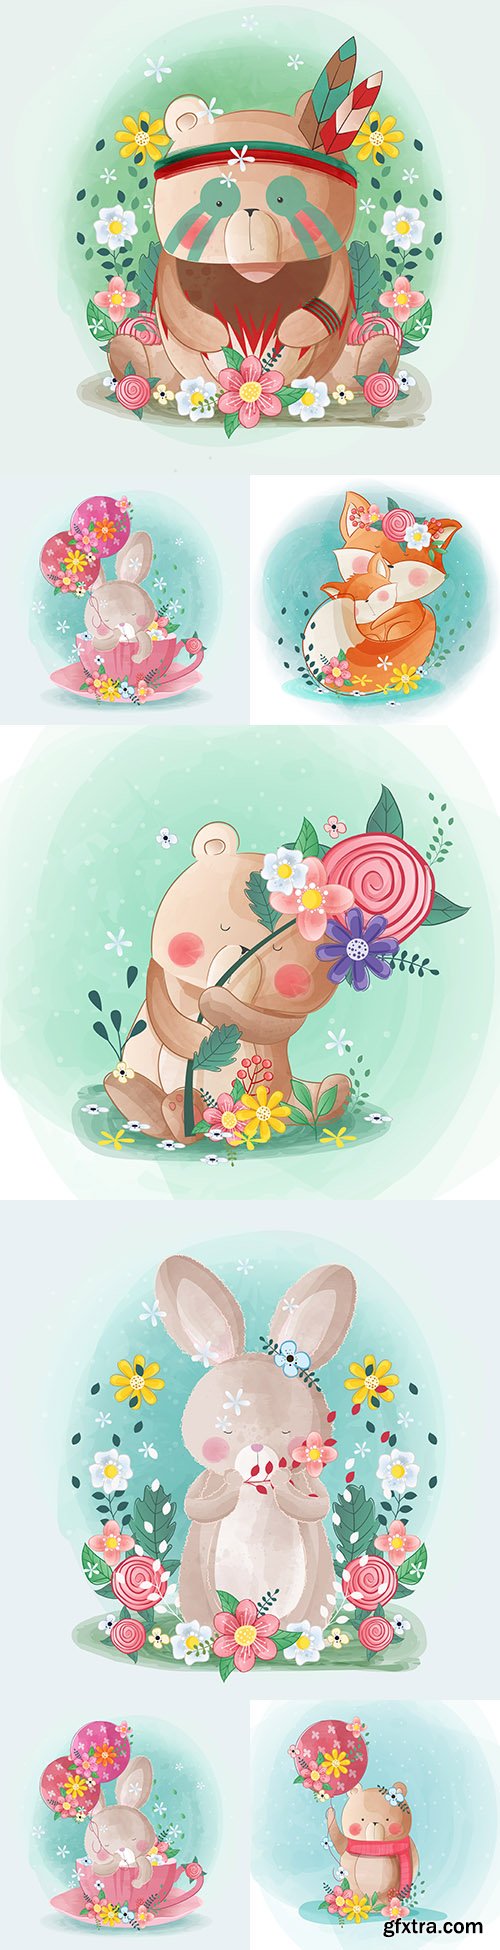 Cute little animals with flowers drawn illustrations
